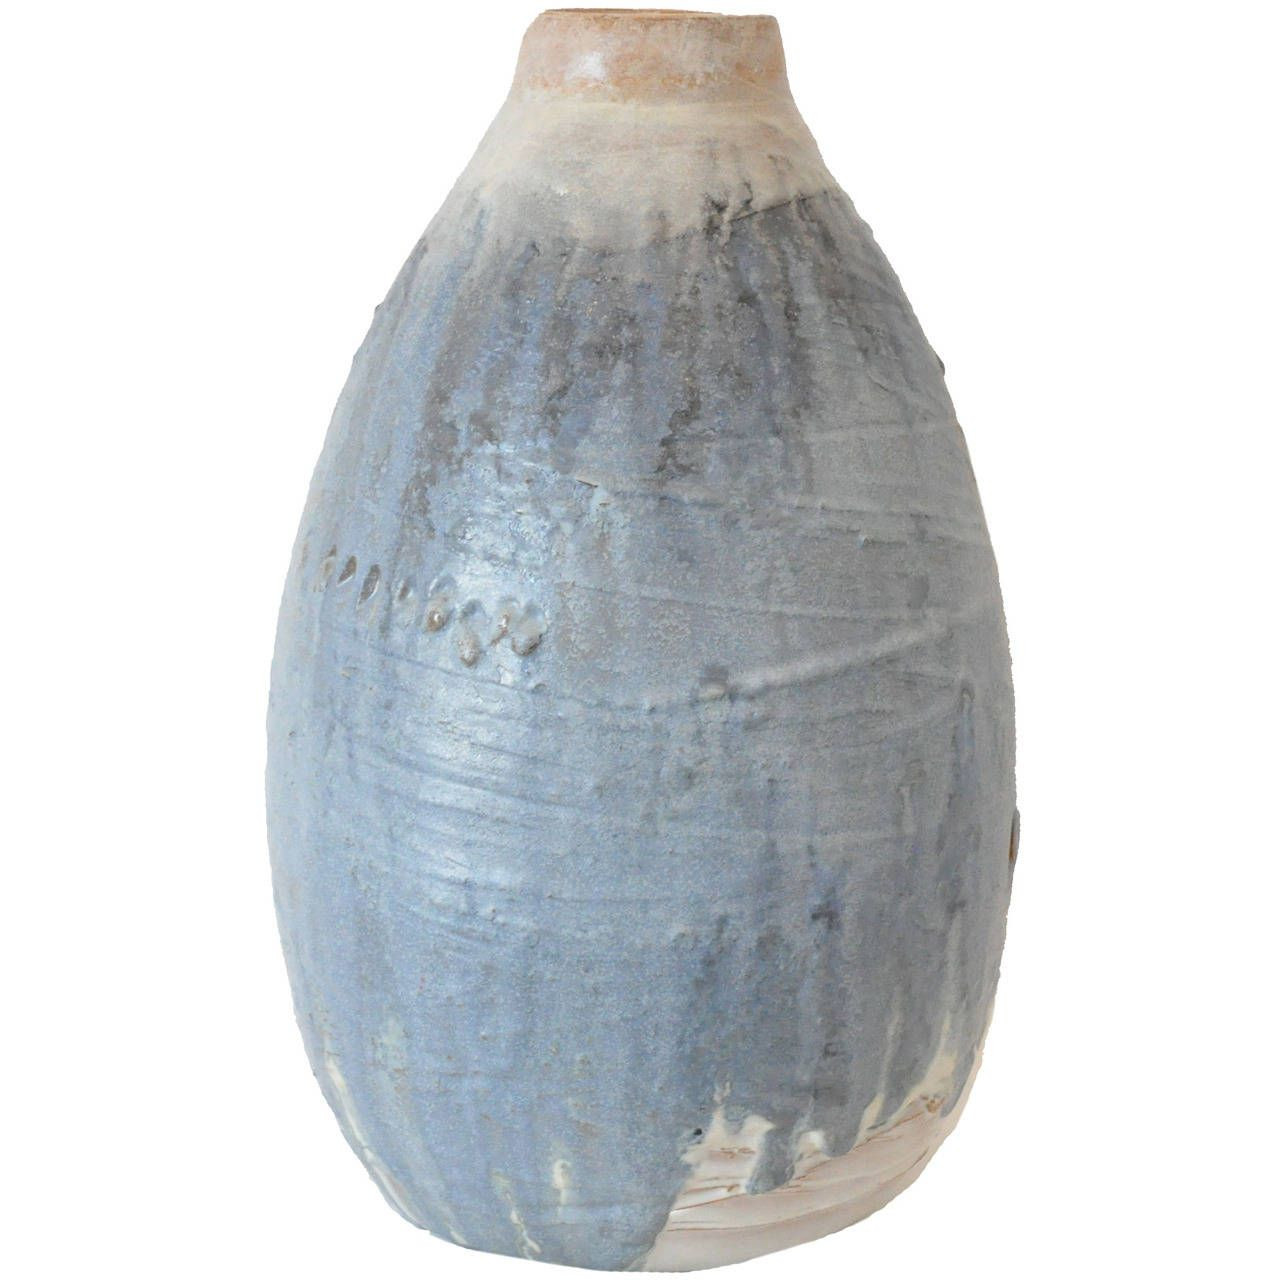 26 Recommended Modern Ceramic Vase 2024 free download modern ceramic vase of marcello fantoni bulbous ceramic vase ceramics worrell smith pertaining to bulbous ceramic vase from a unique collection of antique and modern ceramics at https www 1s